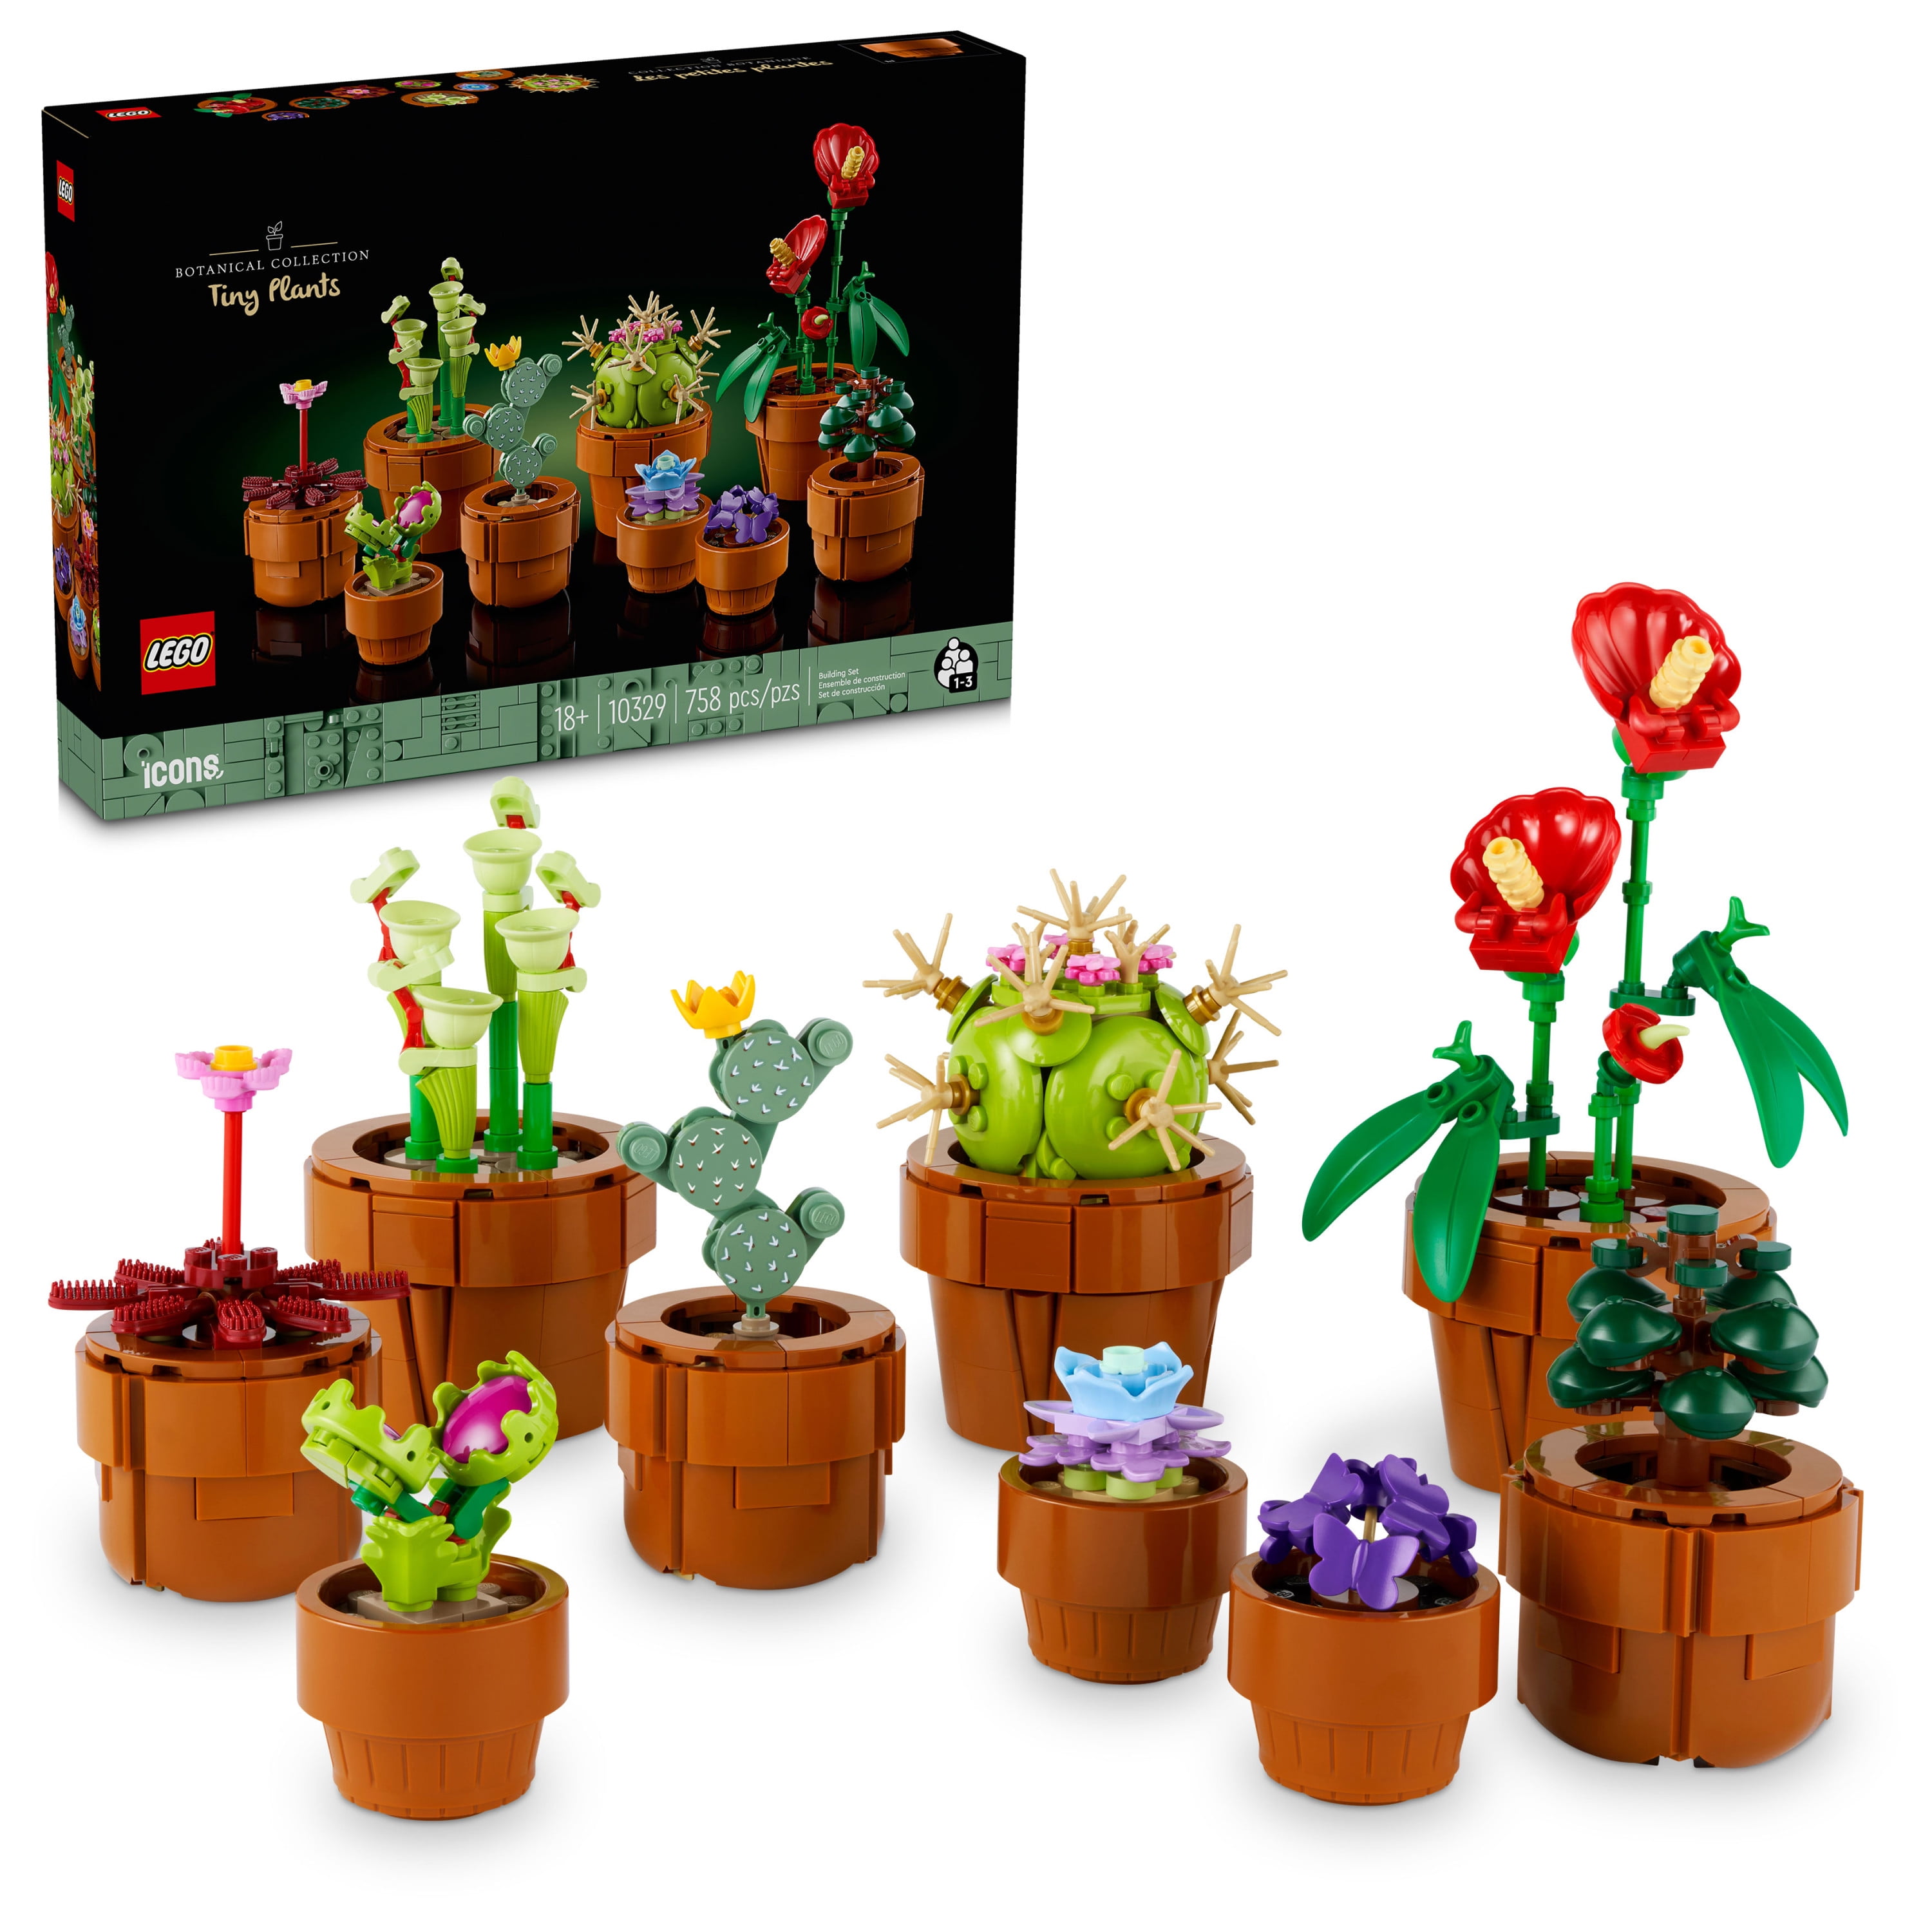 LEGO Icons Tiny Plants Building Set, Home Decor Gift Idea for Flower ...